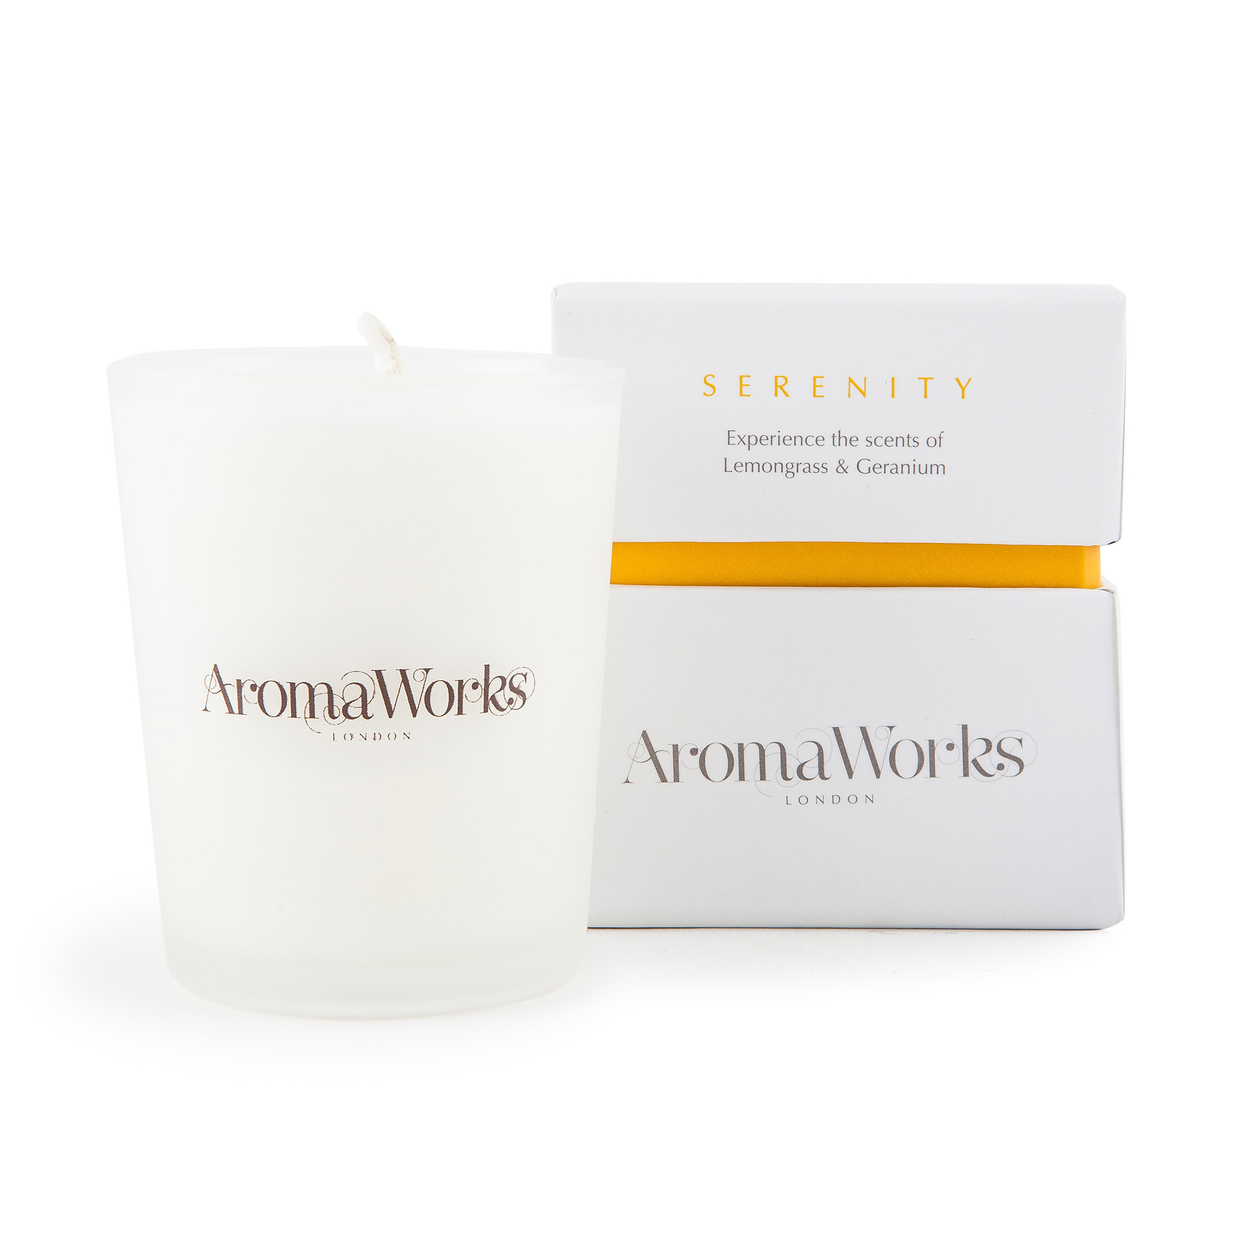 Aromaworks Serenity Candle Small 2.65 Oz